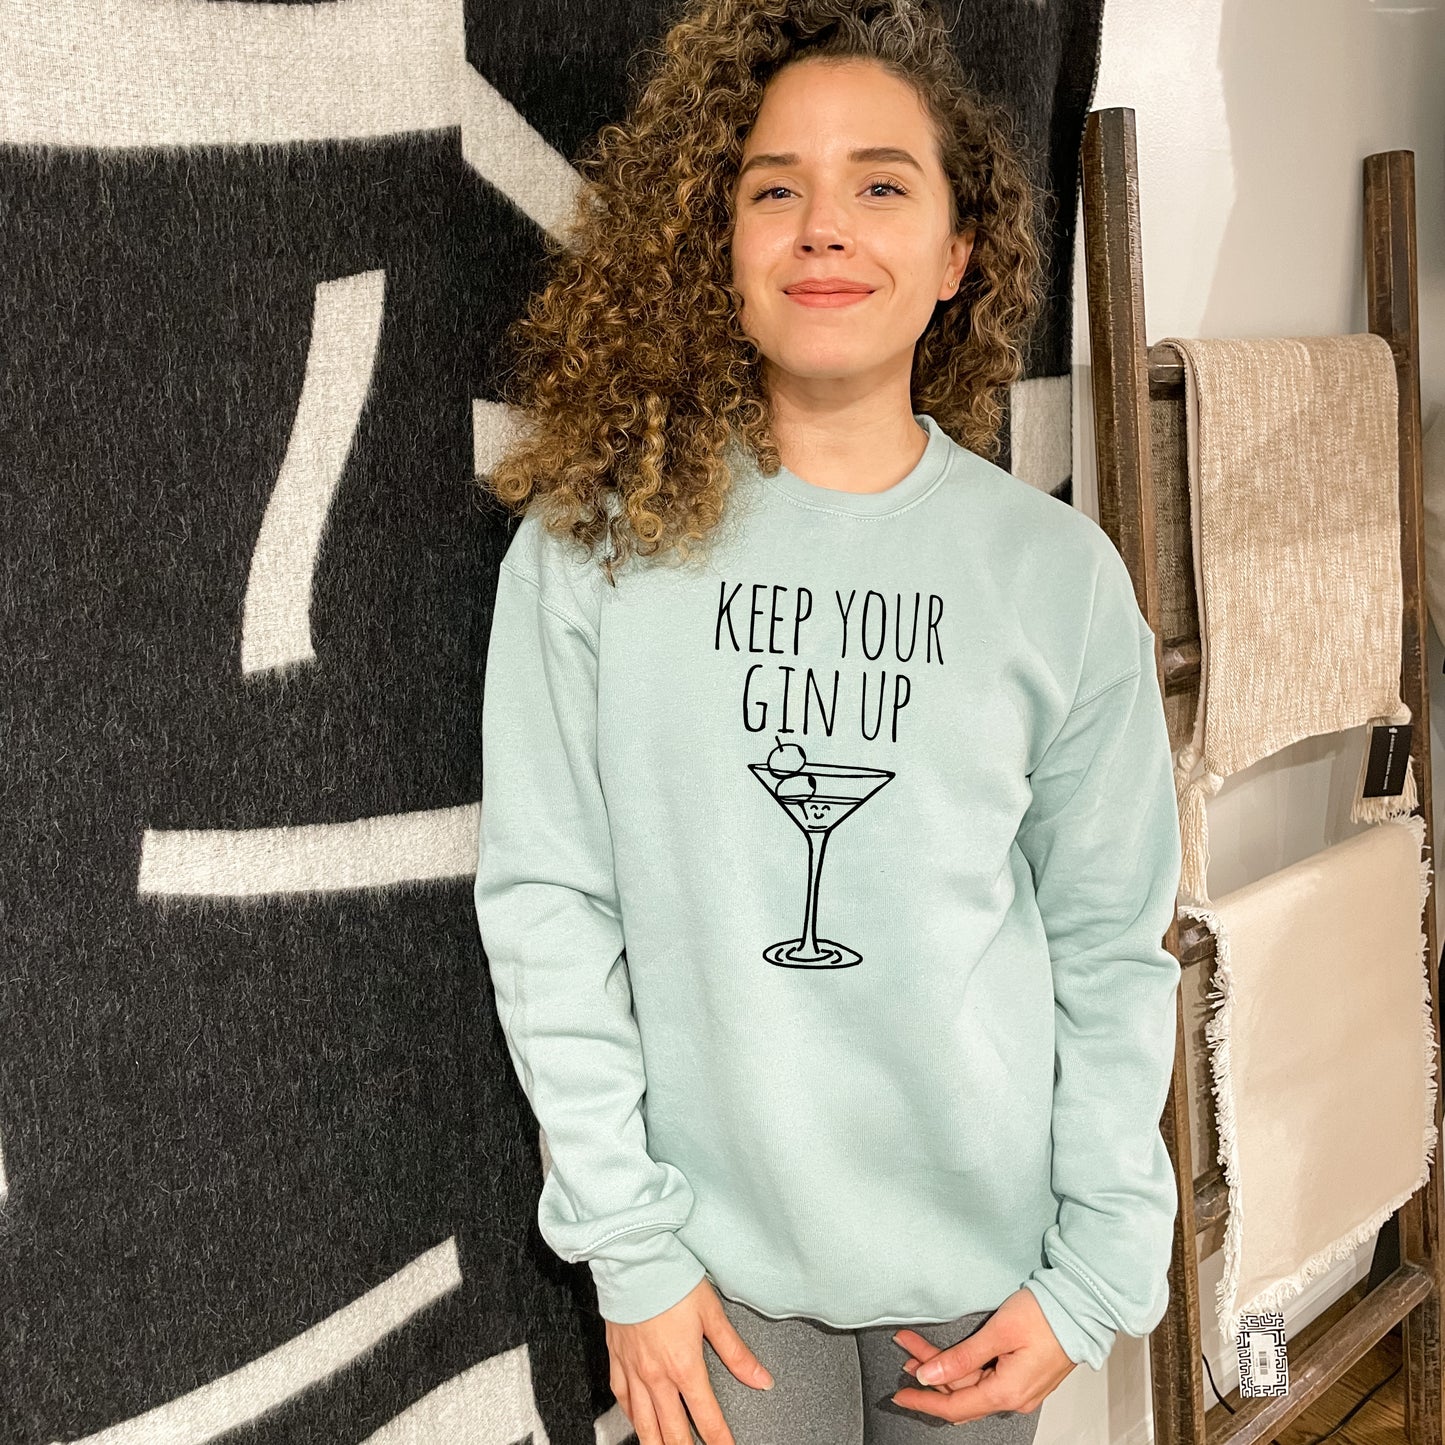 Keep Your Gin Up - Unisex Sweatshirt - Heather Gray or Dusty Blue